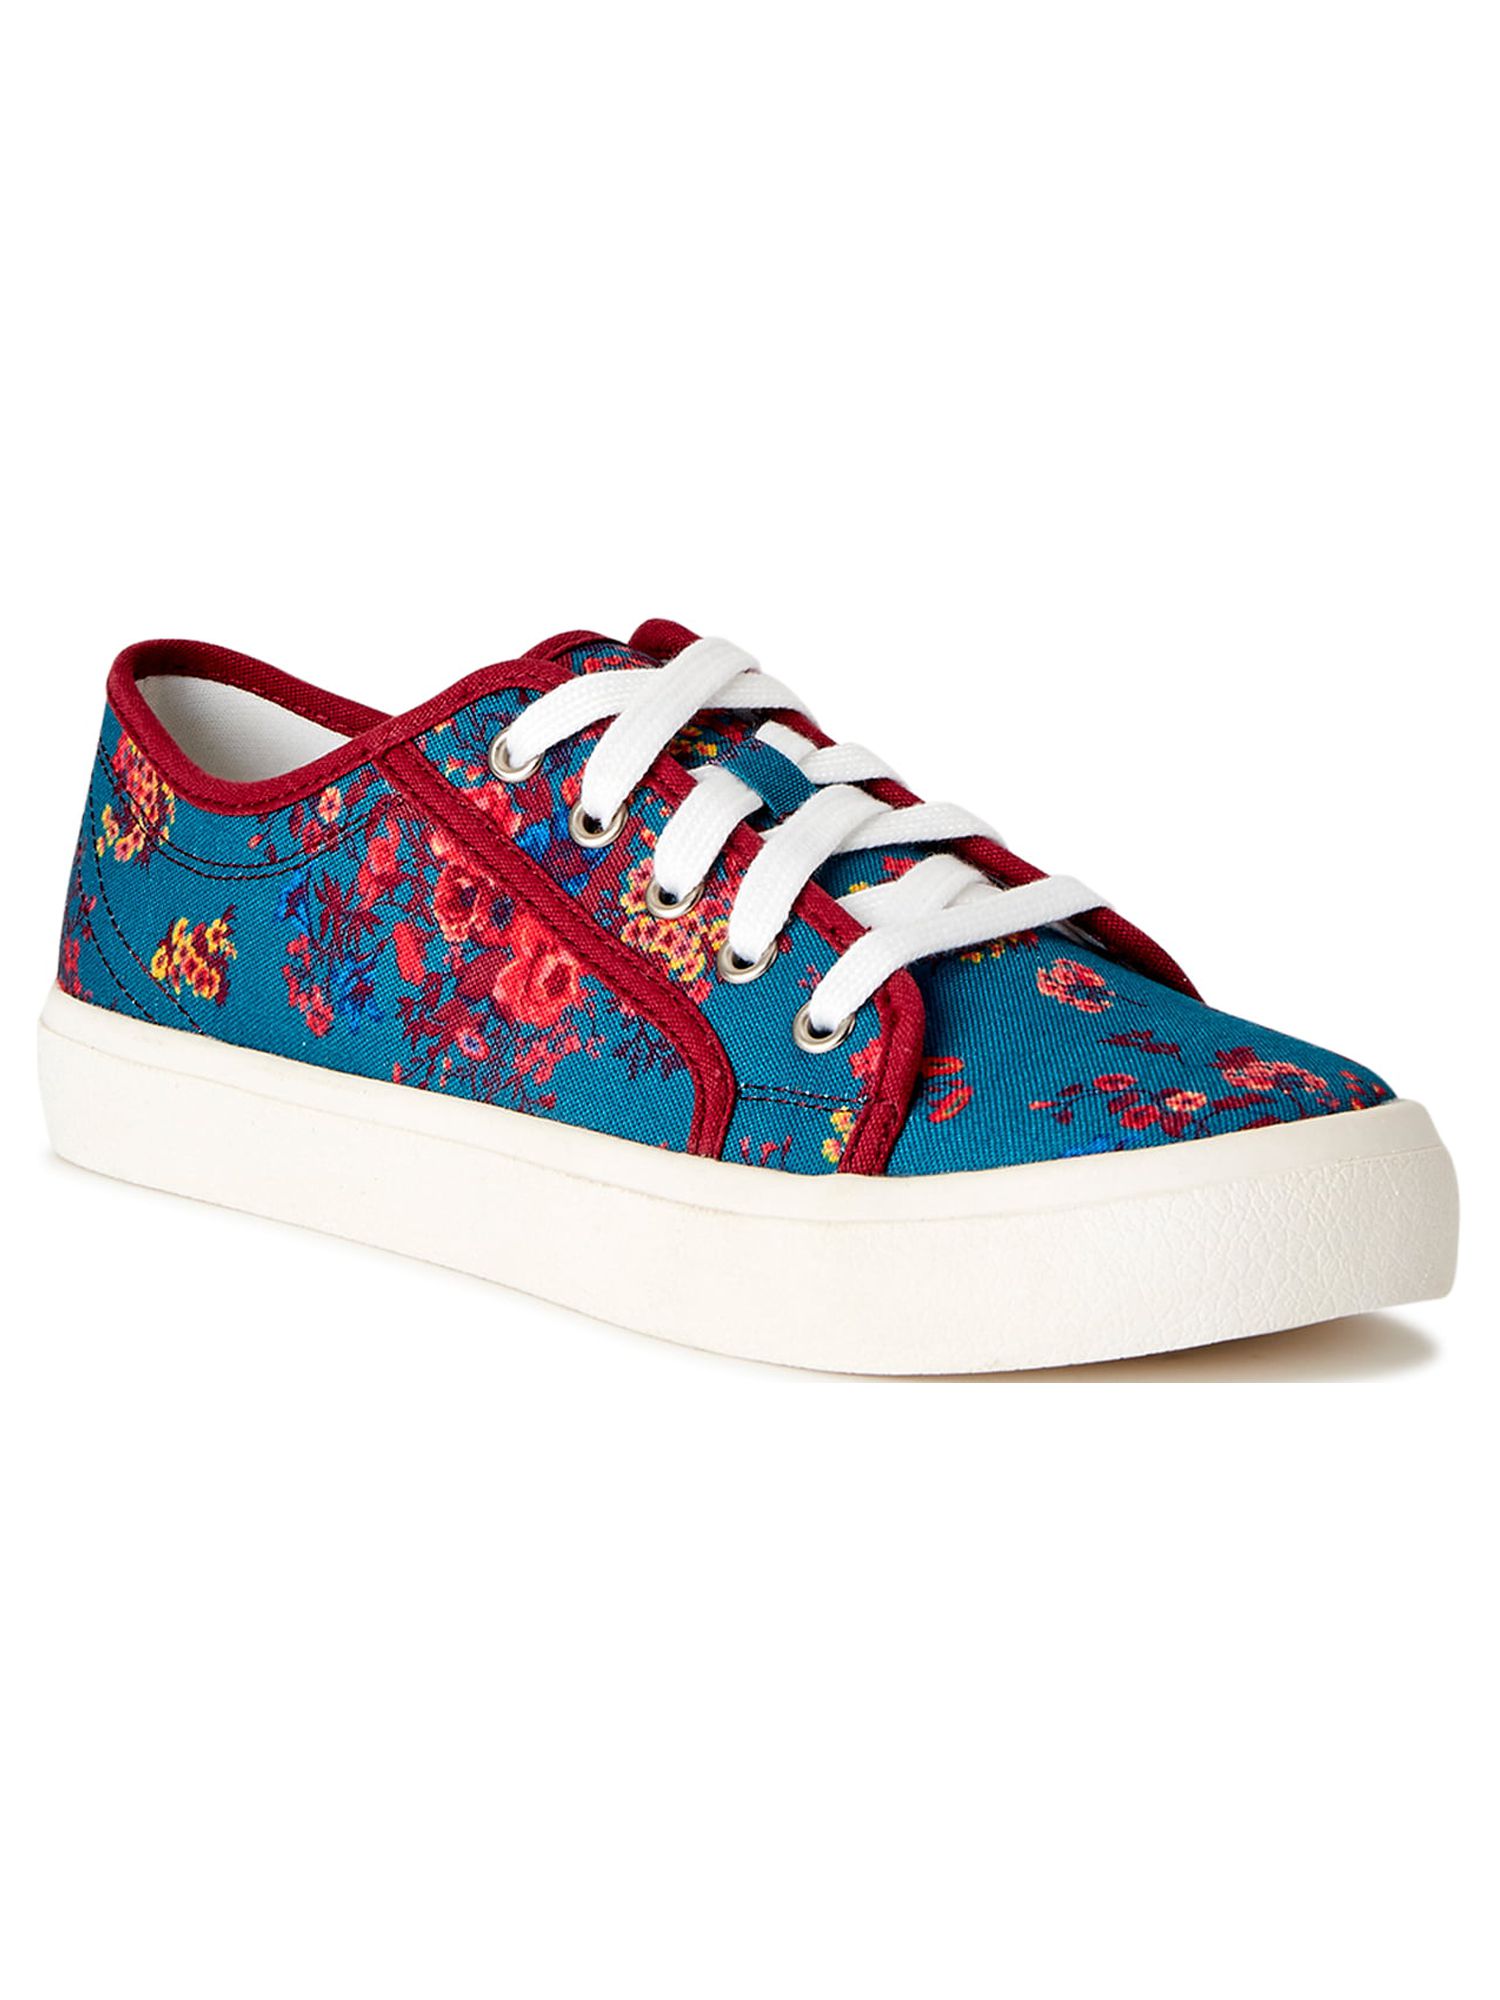 The Pioneer Woman Floral Sneakers, Women's - image 2 of 6